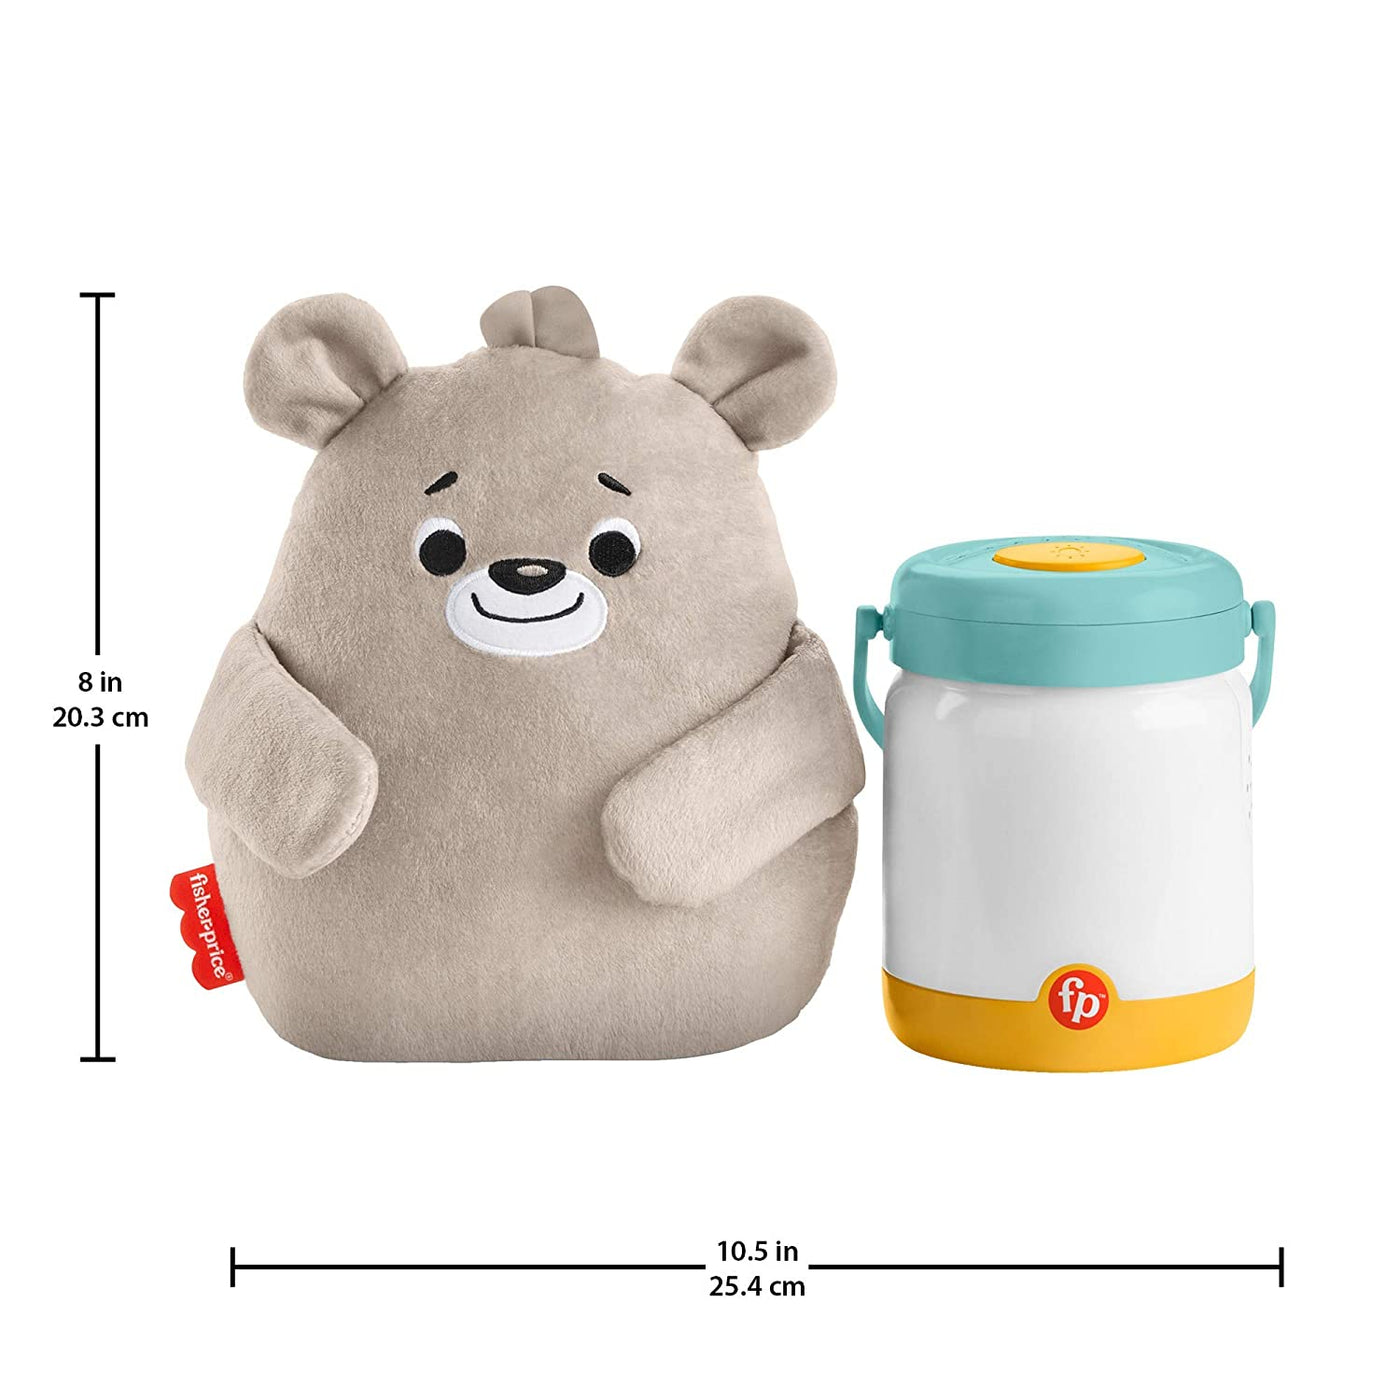 Baby Bear & Firefly Soother, Nursery Sound Machine | Fisher-Price